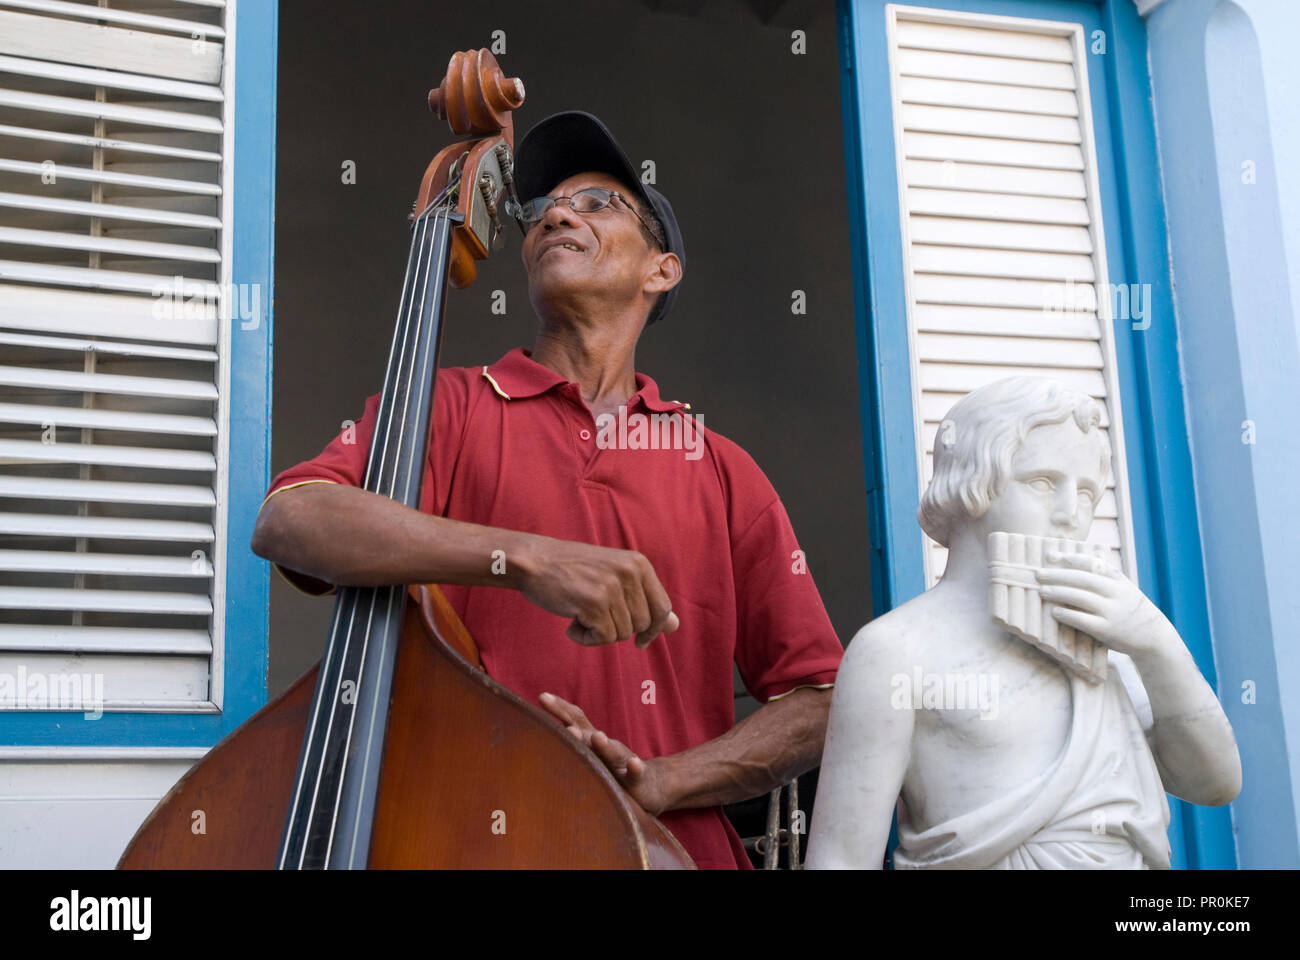 Cello musician resting on his instrument next to a classic sculpture of a flute player  in Cuba Northern Caribbean Stock Photo